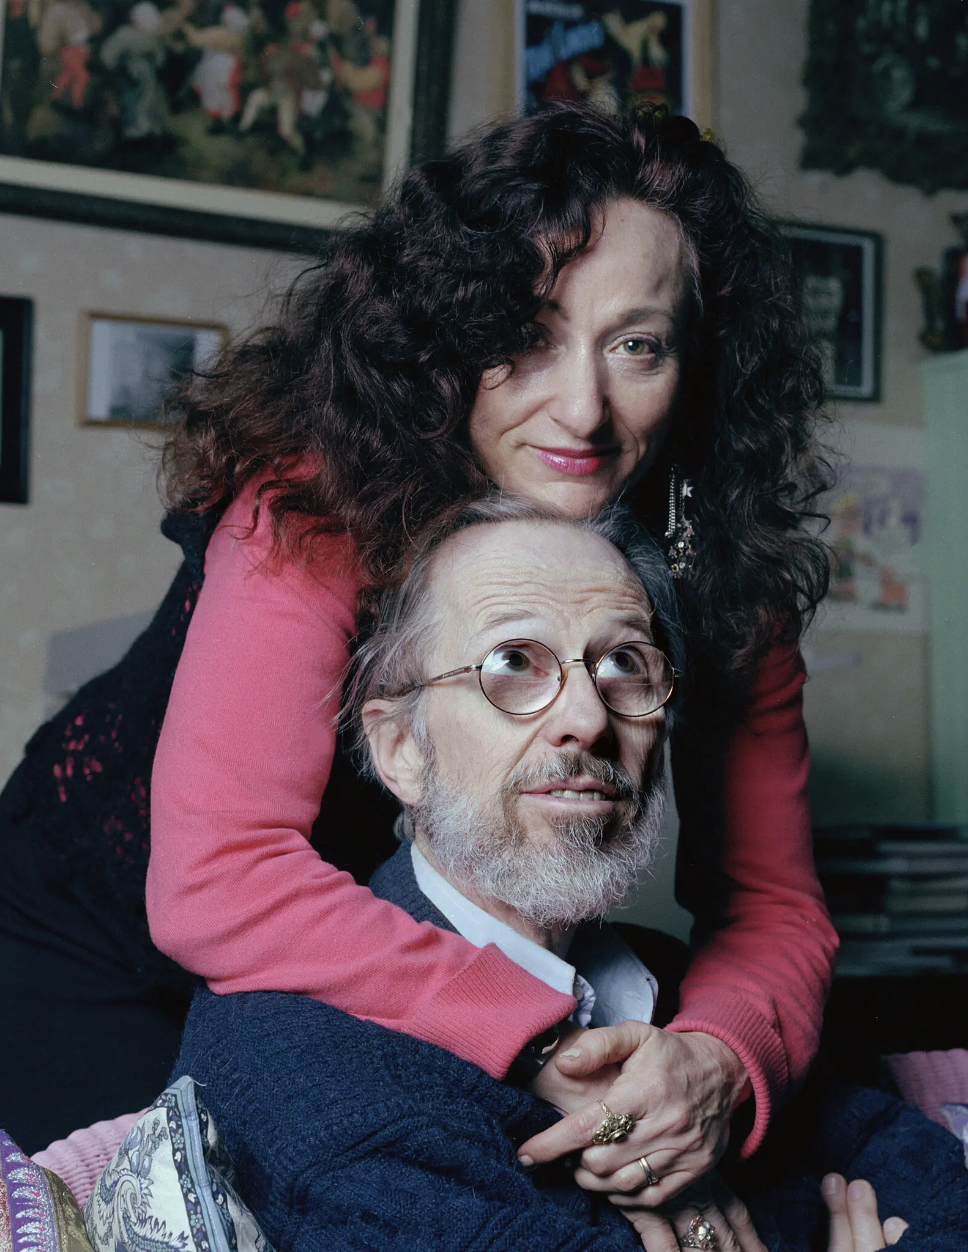  A woman with a light skin tone and long brown, curly hair wraps her arms around a man sitting in a chair and looks directly into the camera. The man has a light skin tone and a white beard, wears thick glasses, and looks up at her. She is wearing a pink shirt and pink lipstick, smiling into the camera. Behind them is a wall full of art.